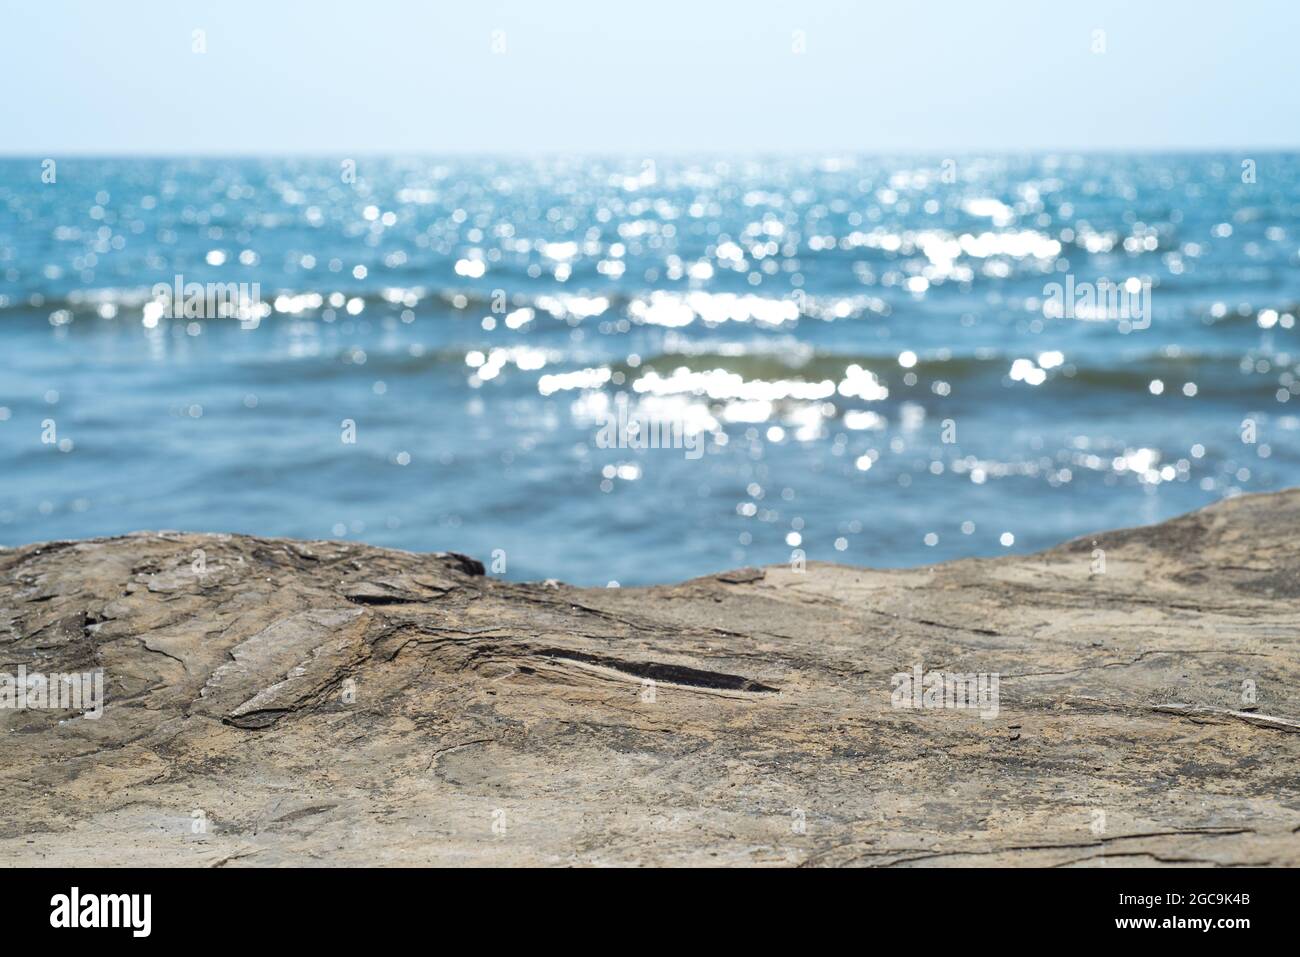 Empty cliff stone with summer blue sea blur background. Copy space for display of product on online media Stock Photo